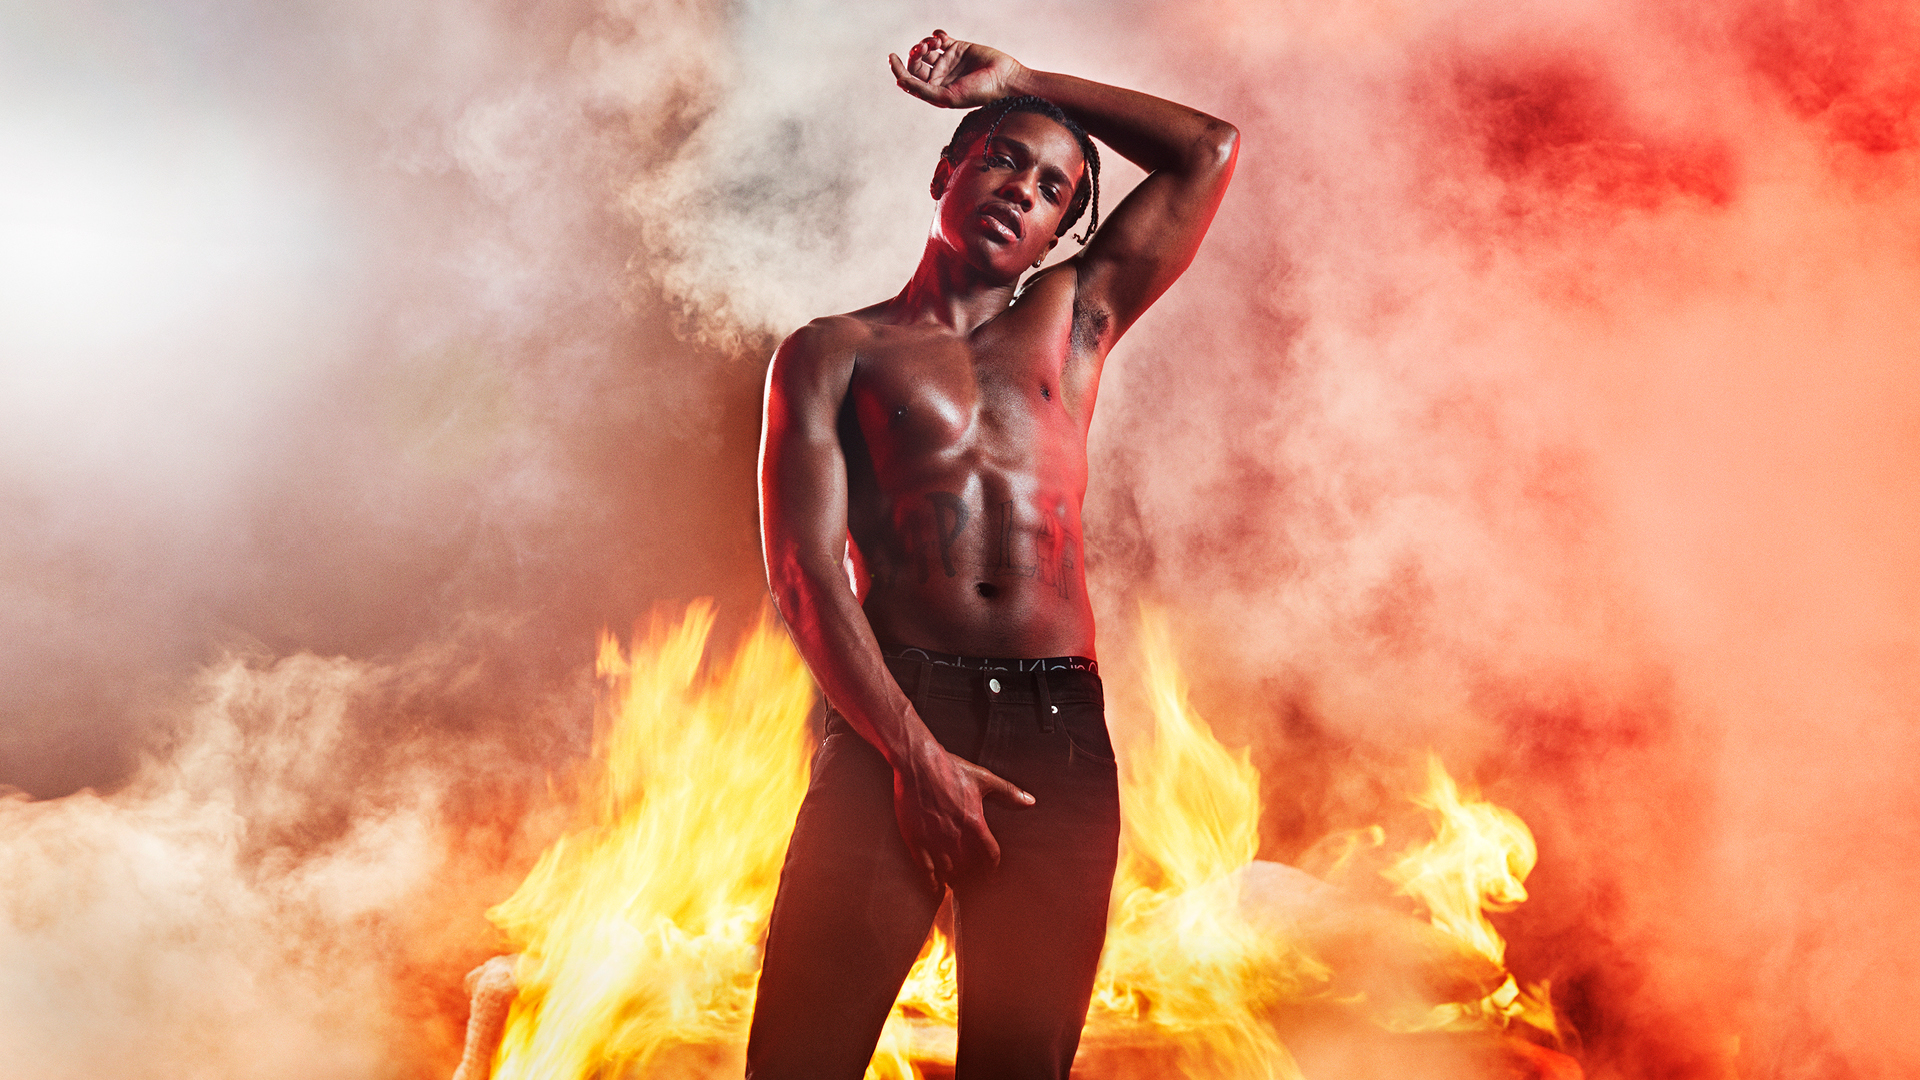 A$AP Rocky stars in the latest Calvin Klein campaign